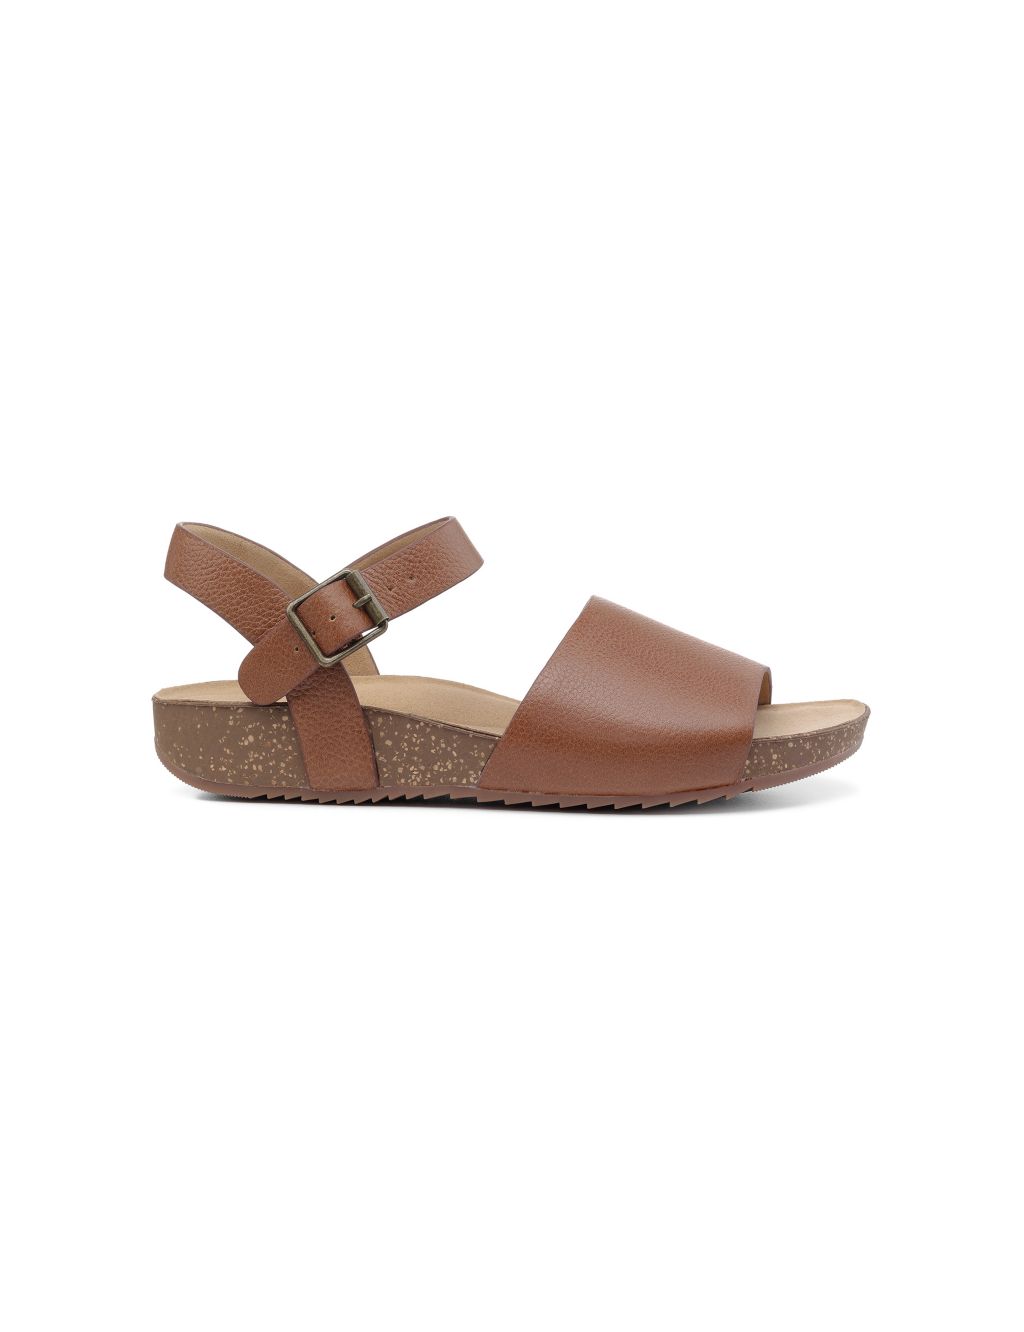 Conwy Leather Ankle Strap Wedge Sandals image 1